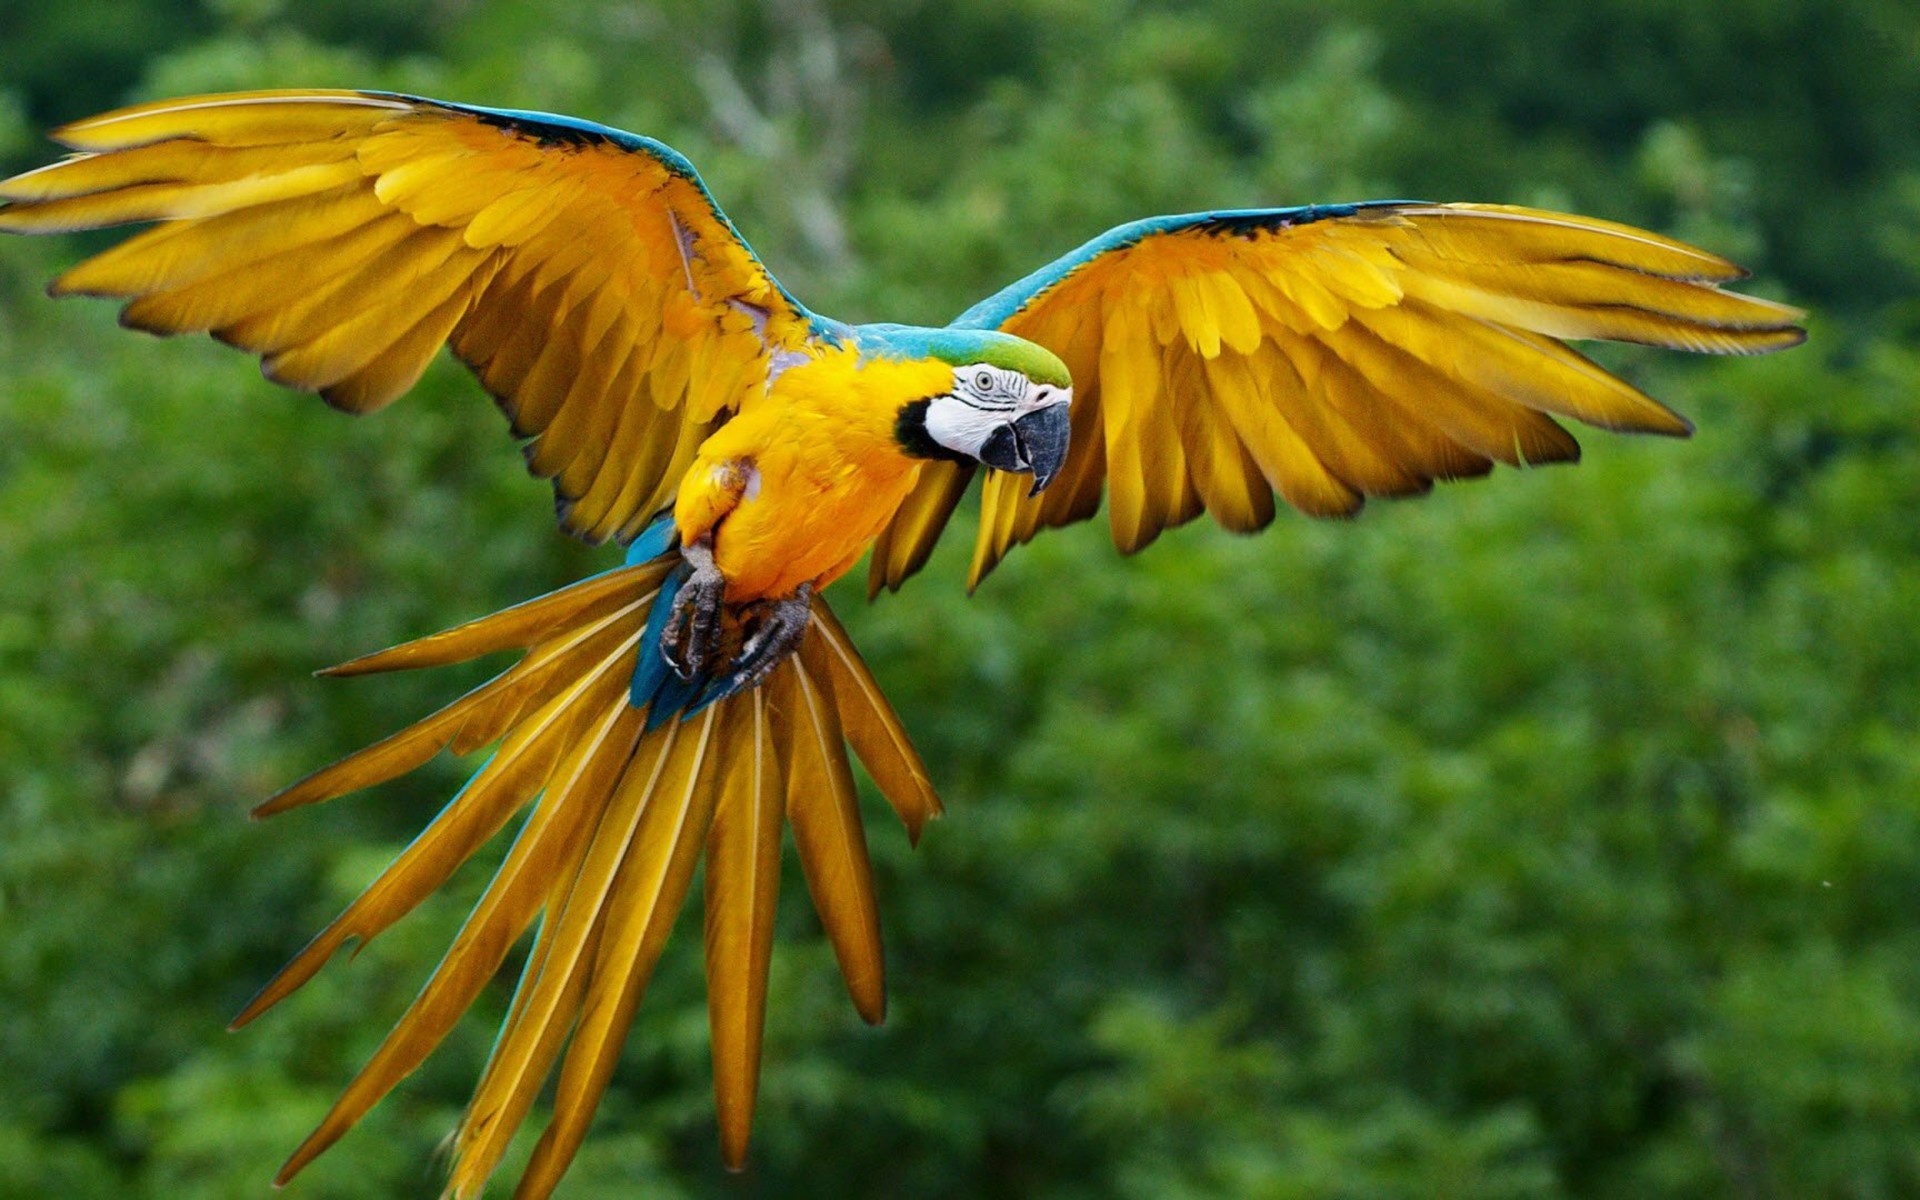 Parrot With Wings Spread - 1920x1200 Wallpaper - teahub.io